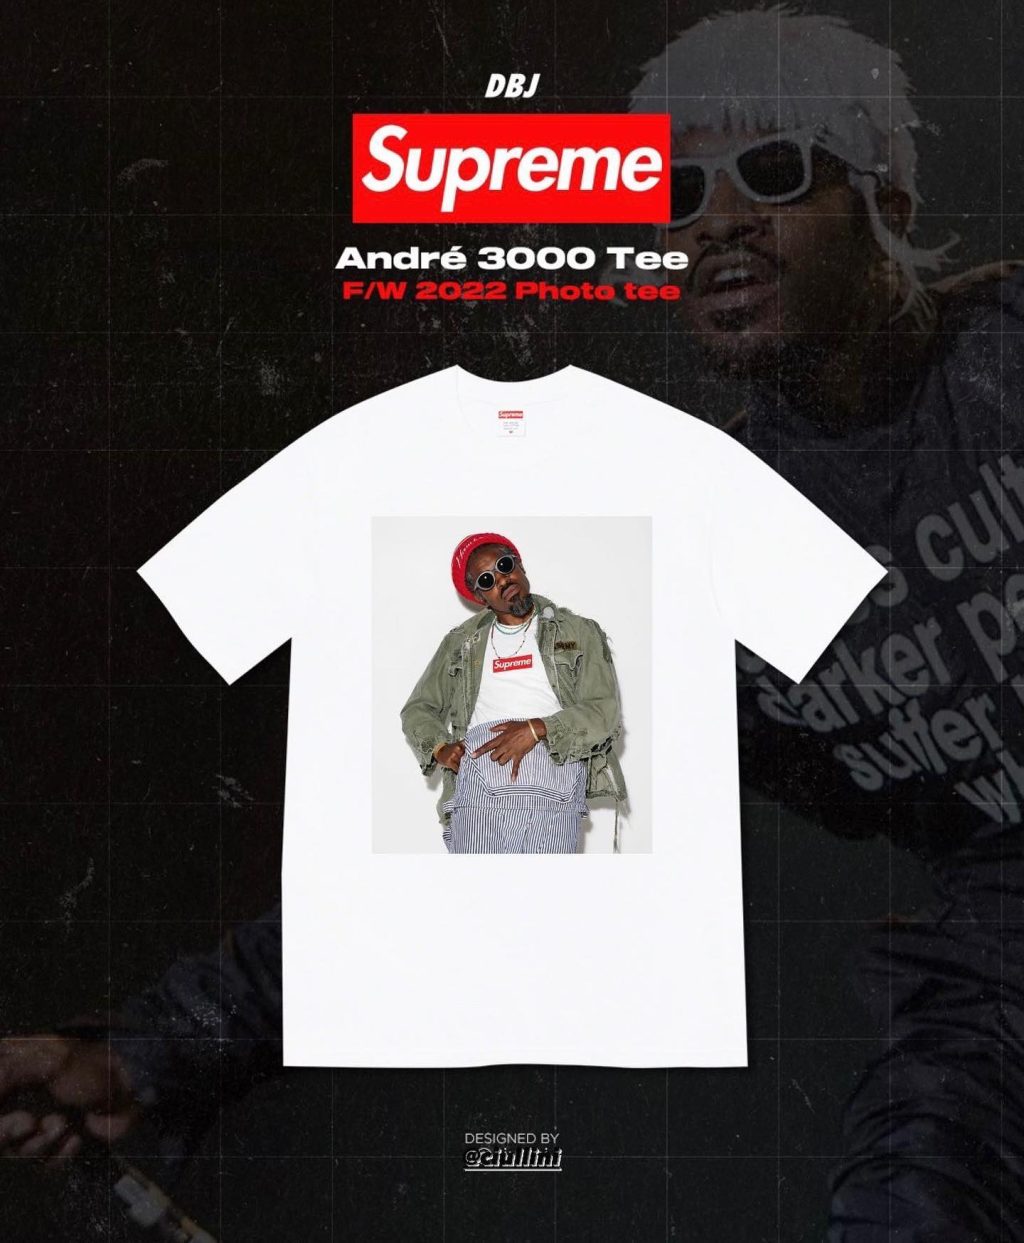 outkast-andre-3000-supreme-photo-tee-22aw-22fw